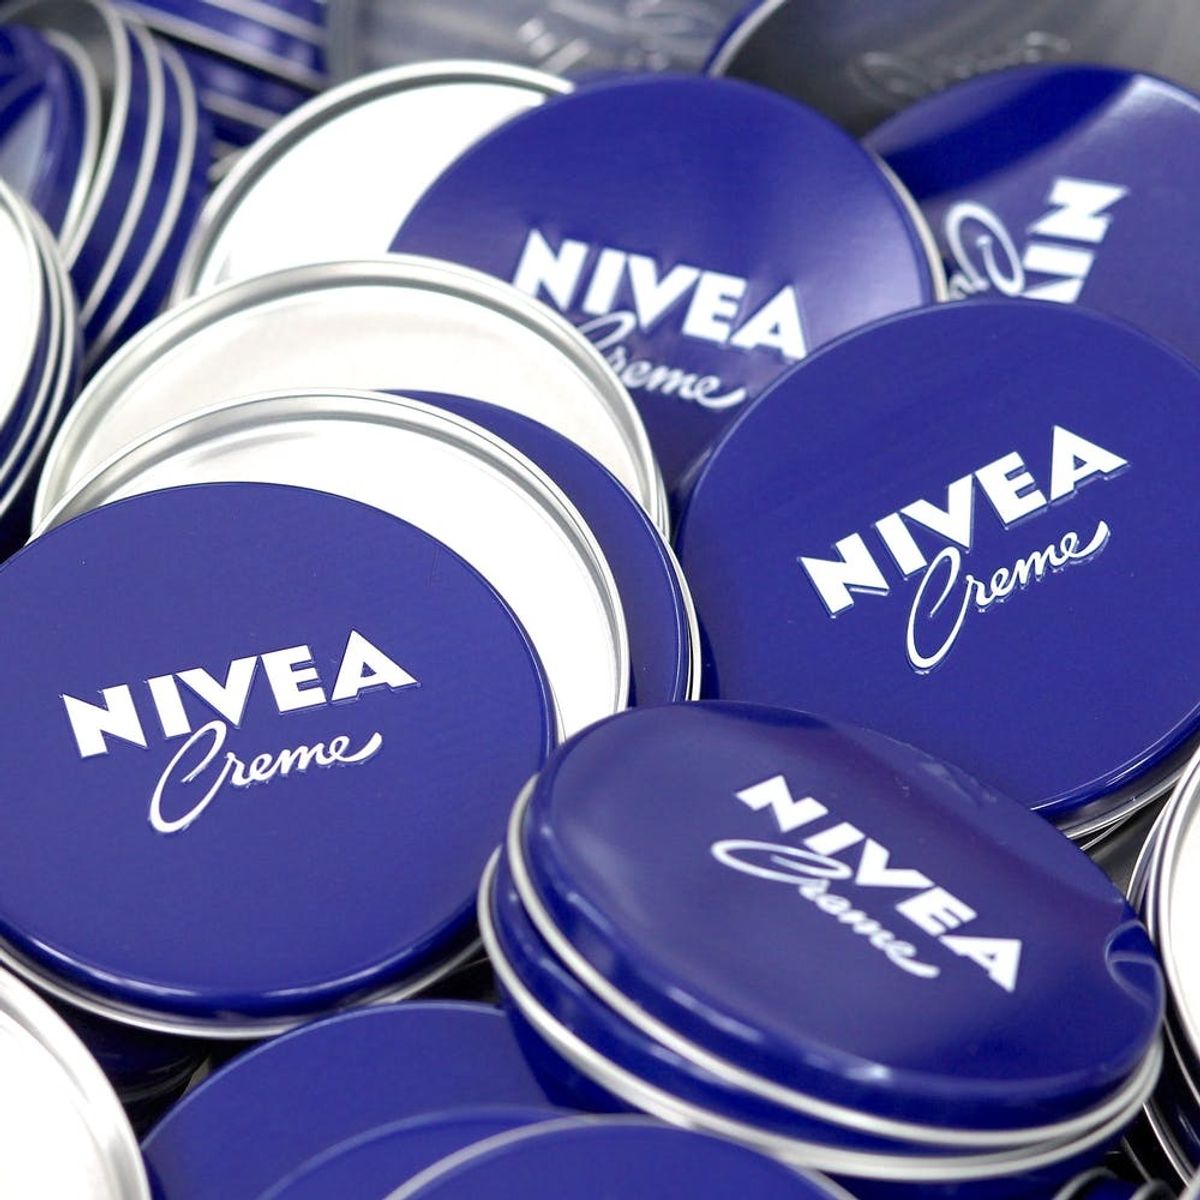 People Are Not Happy With Pepsi, But Did They See Nivea’s Ad?